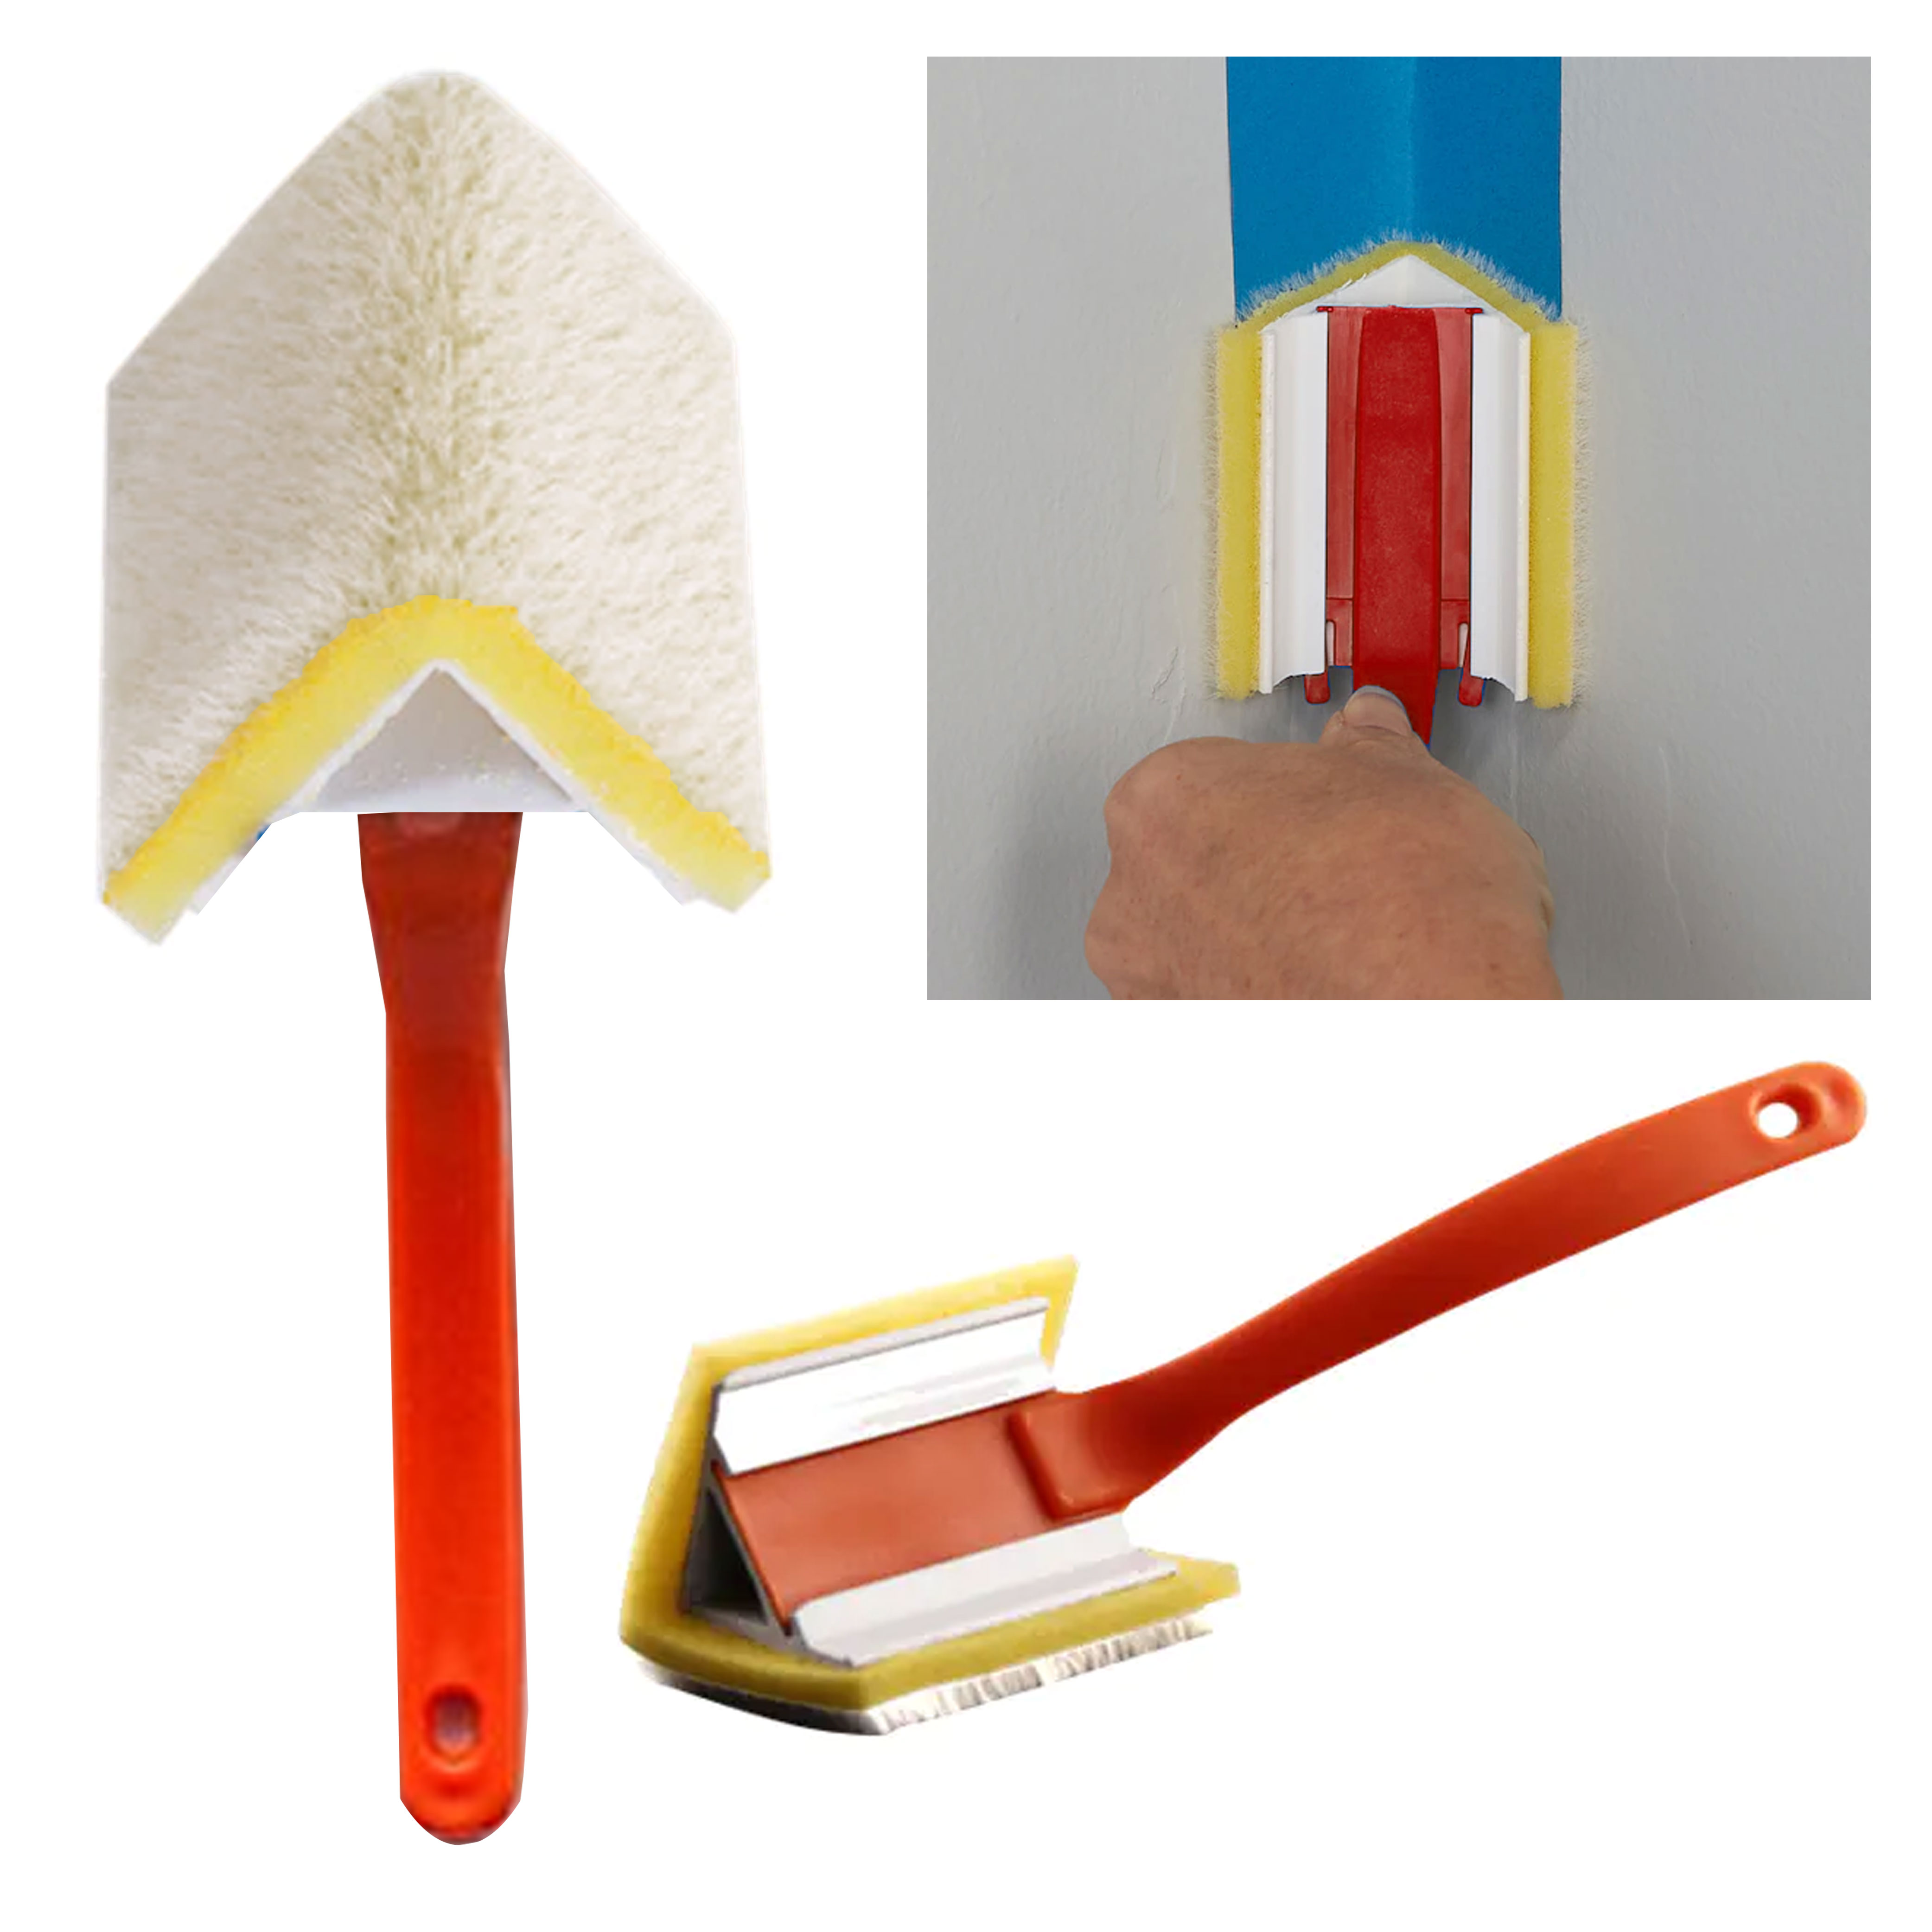 ORFOFE Round Paint Brush Painting Brushes dust Corners for Stairs Edge  Painting Tool Home Improvement Paint Supplies Paint Edger Tool for Walls  Paint